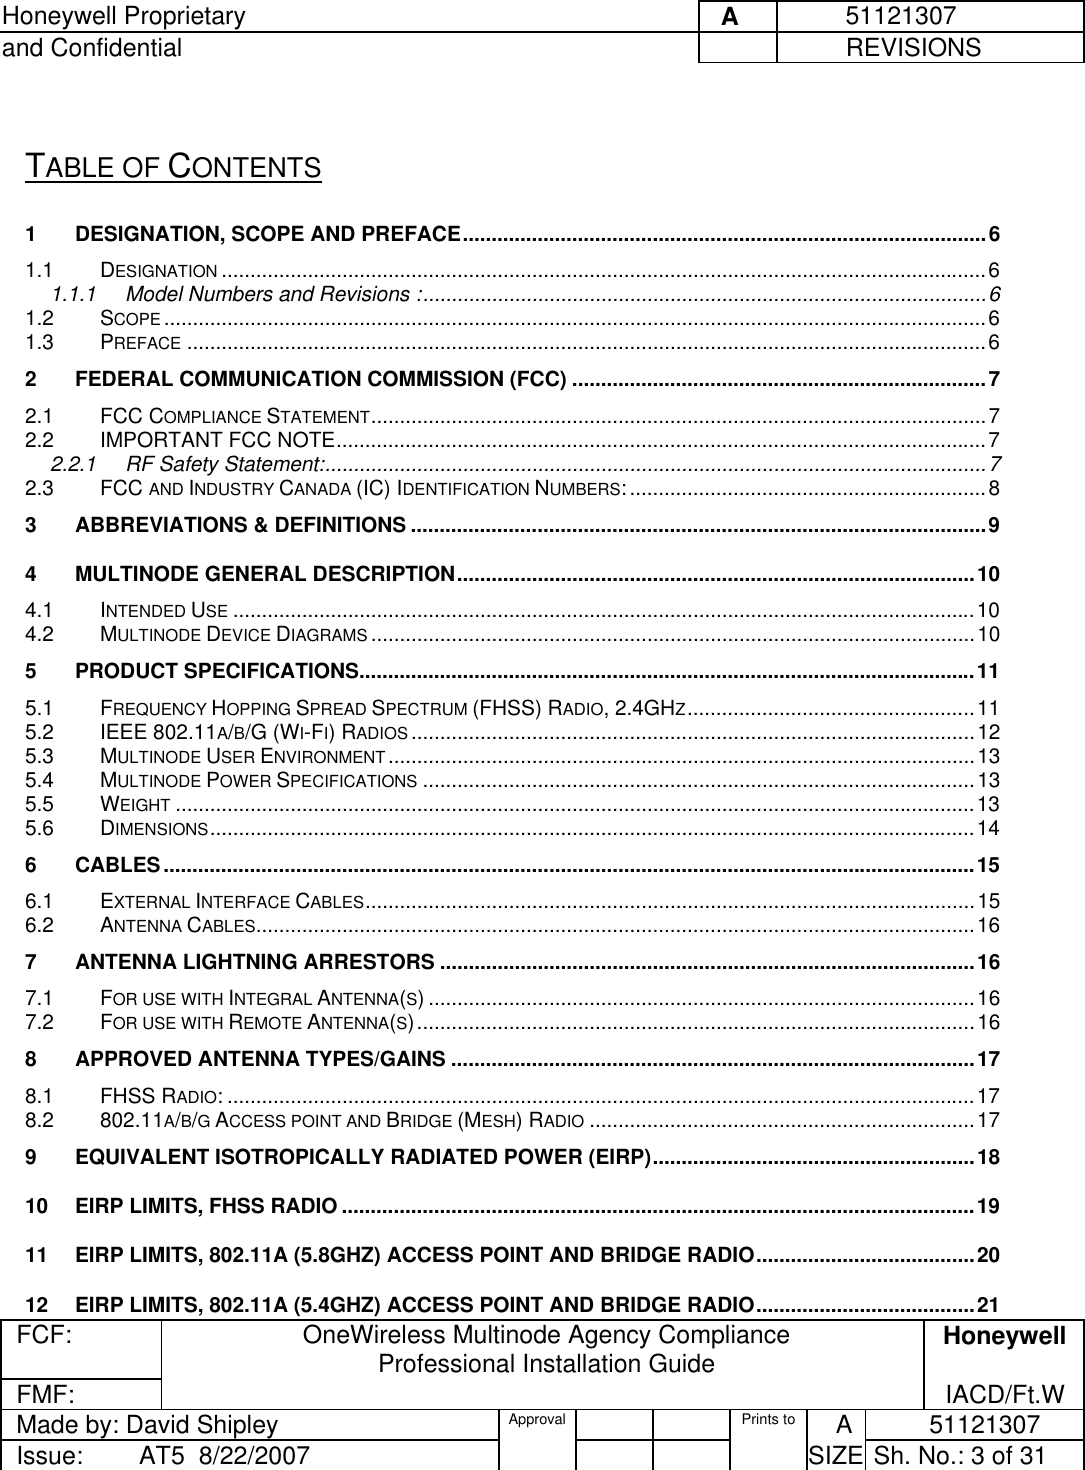 Honeywell Proprietary     A          51121307 and Confidential             REVISIONS  FCF:  OneWireless Multinode Agency Compliance Professional Installation Guide  Honeywell FMF:               IACD/Ft.W Made by: David Shipley  Approval   Prints to     A           51121307 Issue:        AT5  8/22/2007          SIZE  Sh. No.: 3 of 31   TABLE OF CONTENTS 1 DESIGNATION, SCOPE AND PREFACE...........................................................................................6 1.1 DESIGNATION .....................................................................................................................................6 1.1.1 Model Numbers and Revisions :..................................................................................................6 1.2 SCOPE ...............................................................................................................................................6 1.3 PREFACE ...........................................................................................................................................6 2 FEDERAL COMMUNICATION COMMISSION (FCC) ........................................................................7 2.1 FCC COMPLIANCE STATEMENT...........................................................................................................7 2.2 IMPORTANT FCC NOTE.................................................................................................................7 2.2.1 RF Safety Statement:...................................................................................................................7 2.3 FCC AND INDUSTRY CANADA (IC) IDENTIFICATION NUMBERS:..............................................................8 3 ABBREVIATIONS &amp; DEFINITIONS ....................................................................................................9 4 MULTINODE GENERAL DESCRIPTION..........................................................................................10 4.1 INTENDED USE .................................................................................................................................10 4.2 MULTINODE DEVICE DIAGRAMS .........................................................................................................10 5 PRODUCT SPECIFICATIONS...........................................................................................................11 5.1 FREQUENCY HOPPING SPREAD SPECTRUM (FHSS) RADIO, 2.4GHZ..................................................11 5.2 IEEE 802.11A/B/G (WI-FI) RADIOS ..................................................................................................12 5.3 MULTINODE USER ENVIRONMENT......................................................................................................13 5.4 MULTINODE POWER SPECIFICATIONS ................................................................................................13 5.5 WEIGHT ...........................................................................................................................................13 5.6 DIMENSIONS.....................................................................................................................................14 6 CABLES.............................................................................................................................................15 6.1 EXTERNAL INTERFACE CABLES..........................................................................................................15 6.2 ANTENNA CABLES.............................................................................................................................16 7 ANTENNA LIGHTNING ARRESTORS .............................................................................................16 7.1 FOR USE WITH INTEGRAL ANTENNA(S) ...............................................................................................16 7.2 FOR USE WITH REMOTE ANTENNA(S).................................................................................................16 8 APPROVED ANTENNA TYPES/GAINS ...........................................................................................17 8.1 FHSS RADIO: ..................................................................................................................................17 8.2 802.11A/B/G ACCESS POINT AND BRIDGE (MESH) RADIO ...................................................................17 9 EQUIVALENT ISOTROPICALLY RADIATED POWER (EIRP)........................................................18 10 EIRP LIMITS, FHSS RADIO ..............................................................................................................19 11 EIRP LIMITS, 802.11A (5.8GHZ) ACCESS POINT AND BRIDGE RADIO......................................20 12 EIRP LIMITS, 802.11A (5.4GHZ) ACCESS POINT AND BRIDGE RADIO......................................21 